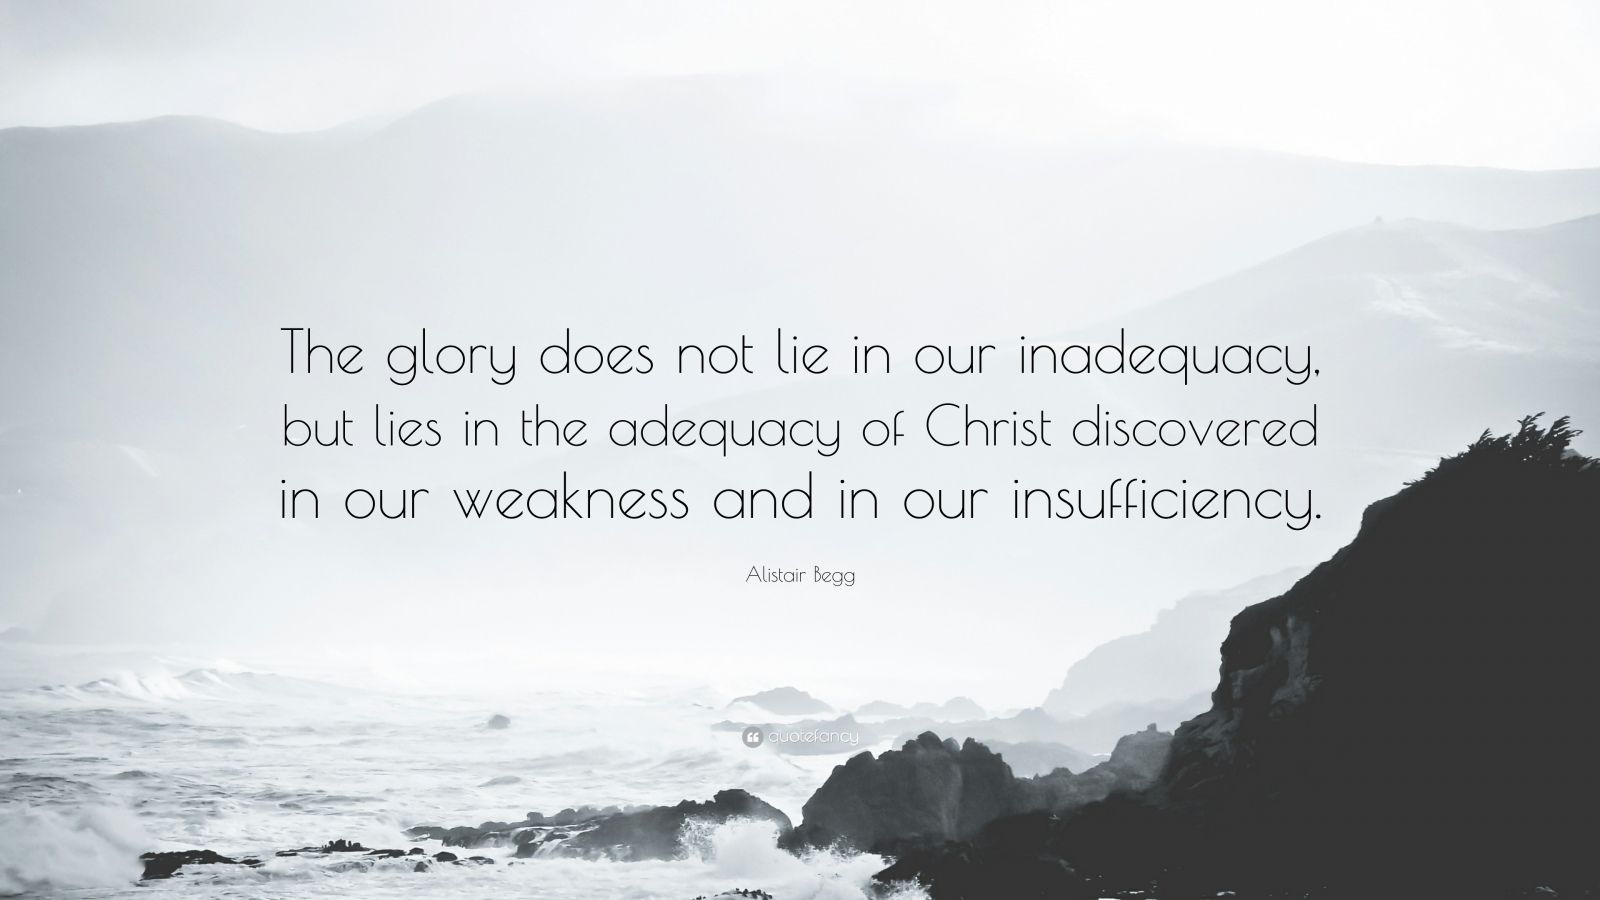 Alistair Begg Quote: “The glory does not lie in our inadequacy, but